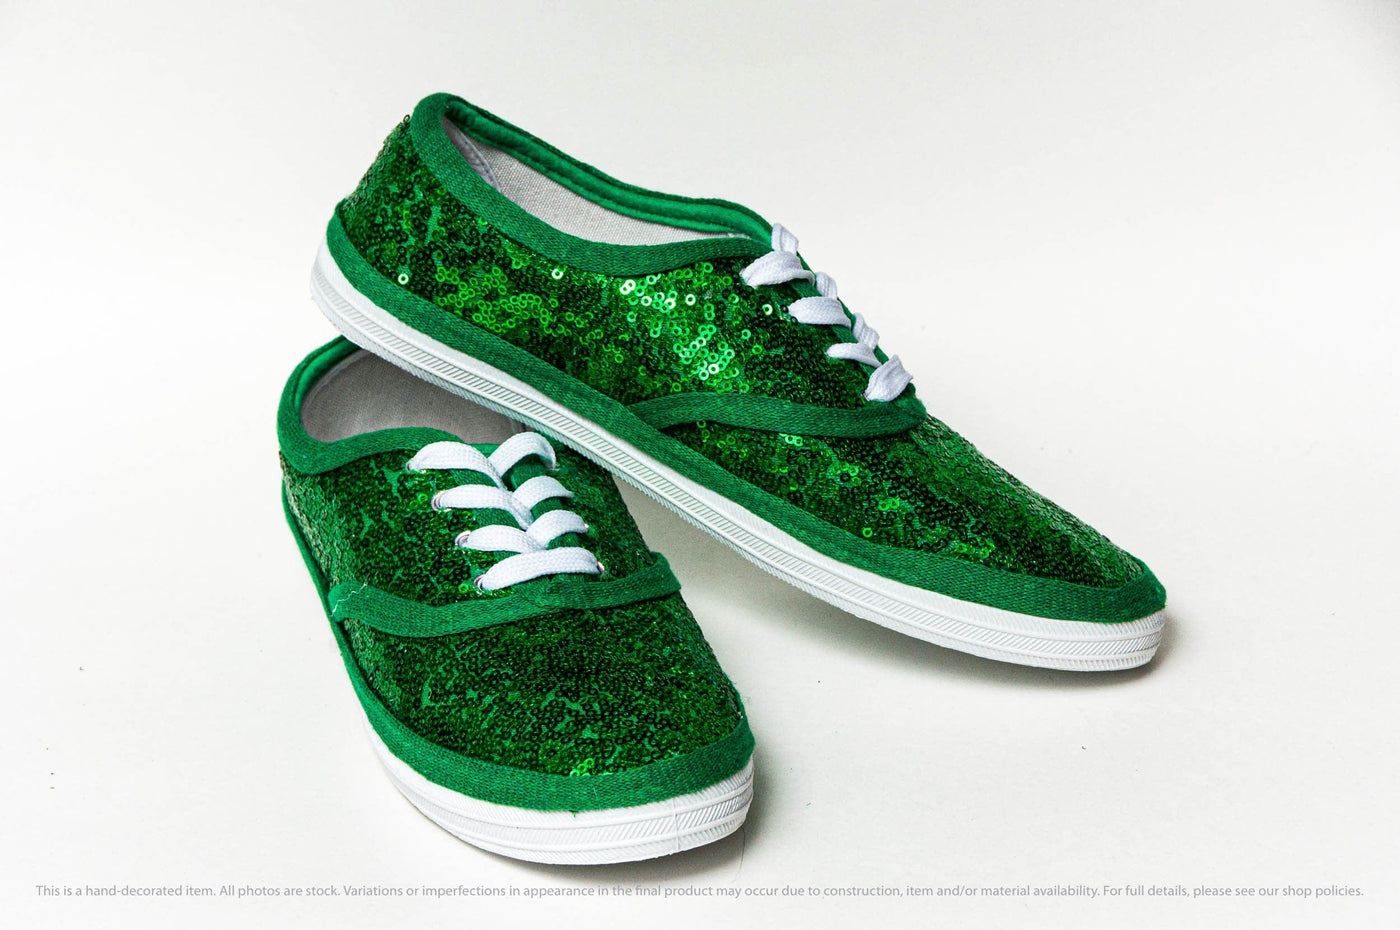 Green Sequin Sneakers for Weddings, Brides, Bridesmaids, Prom